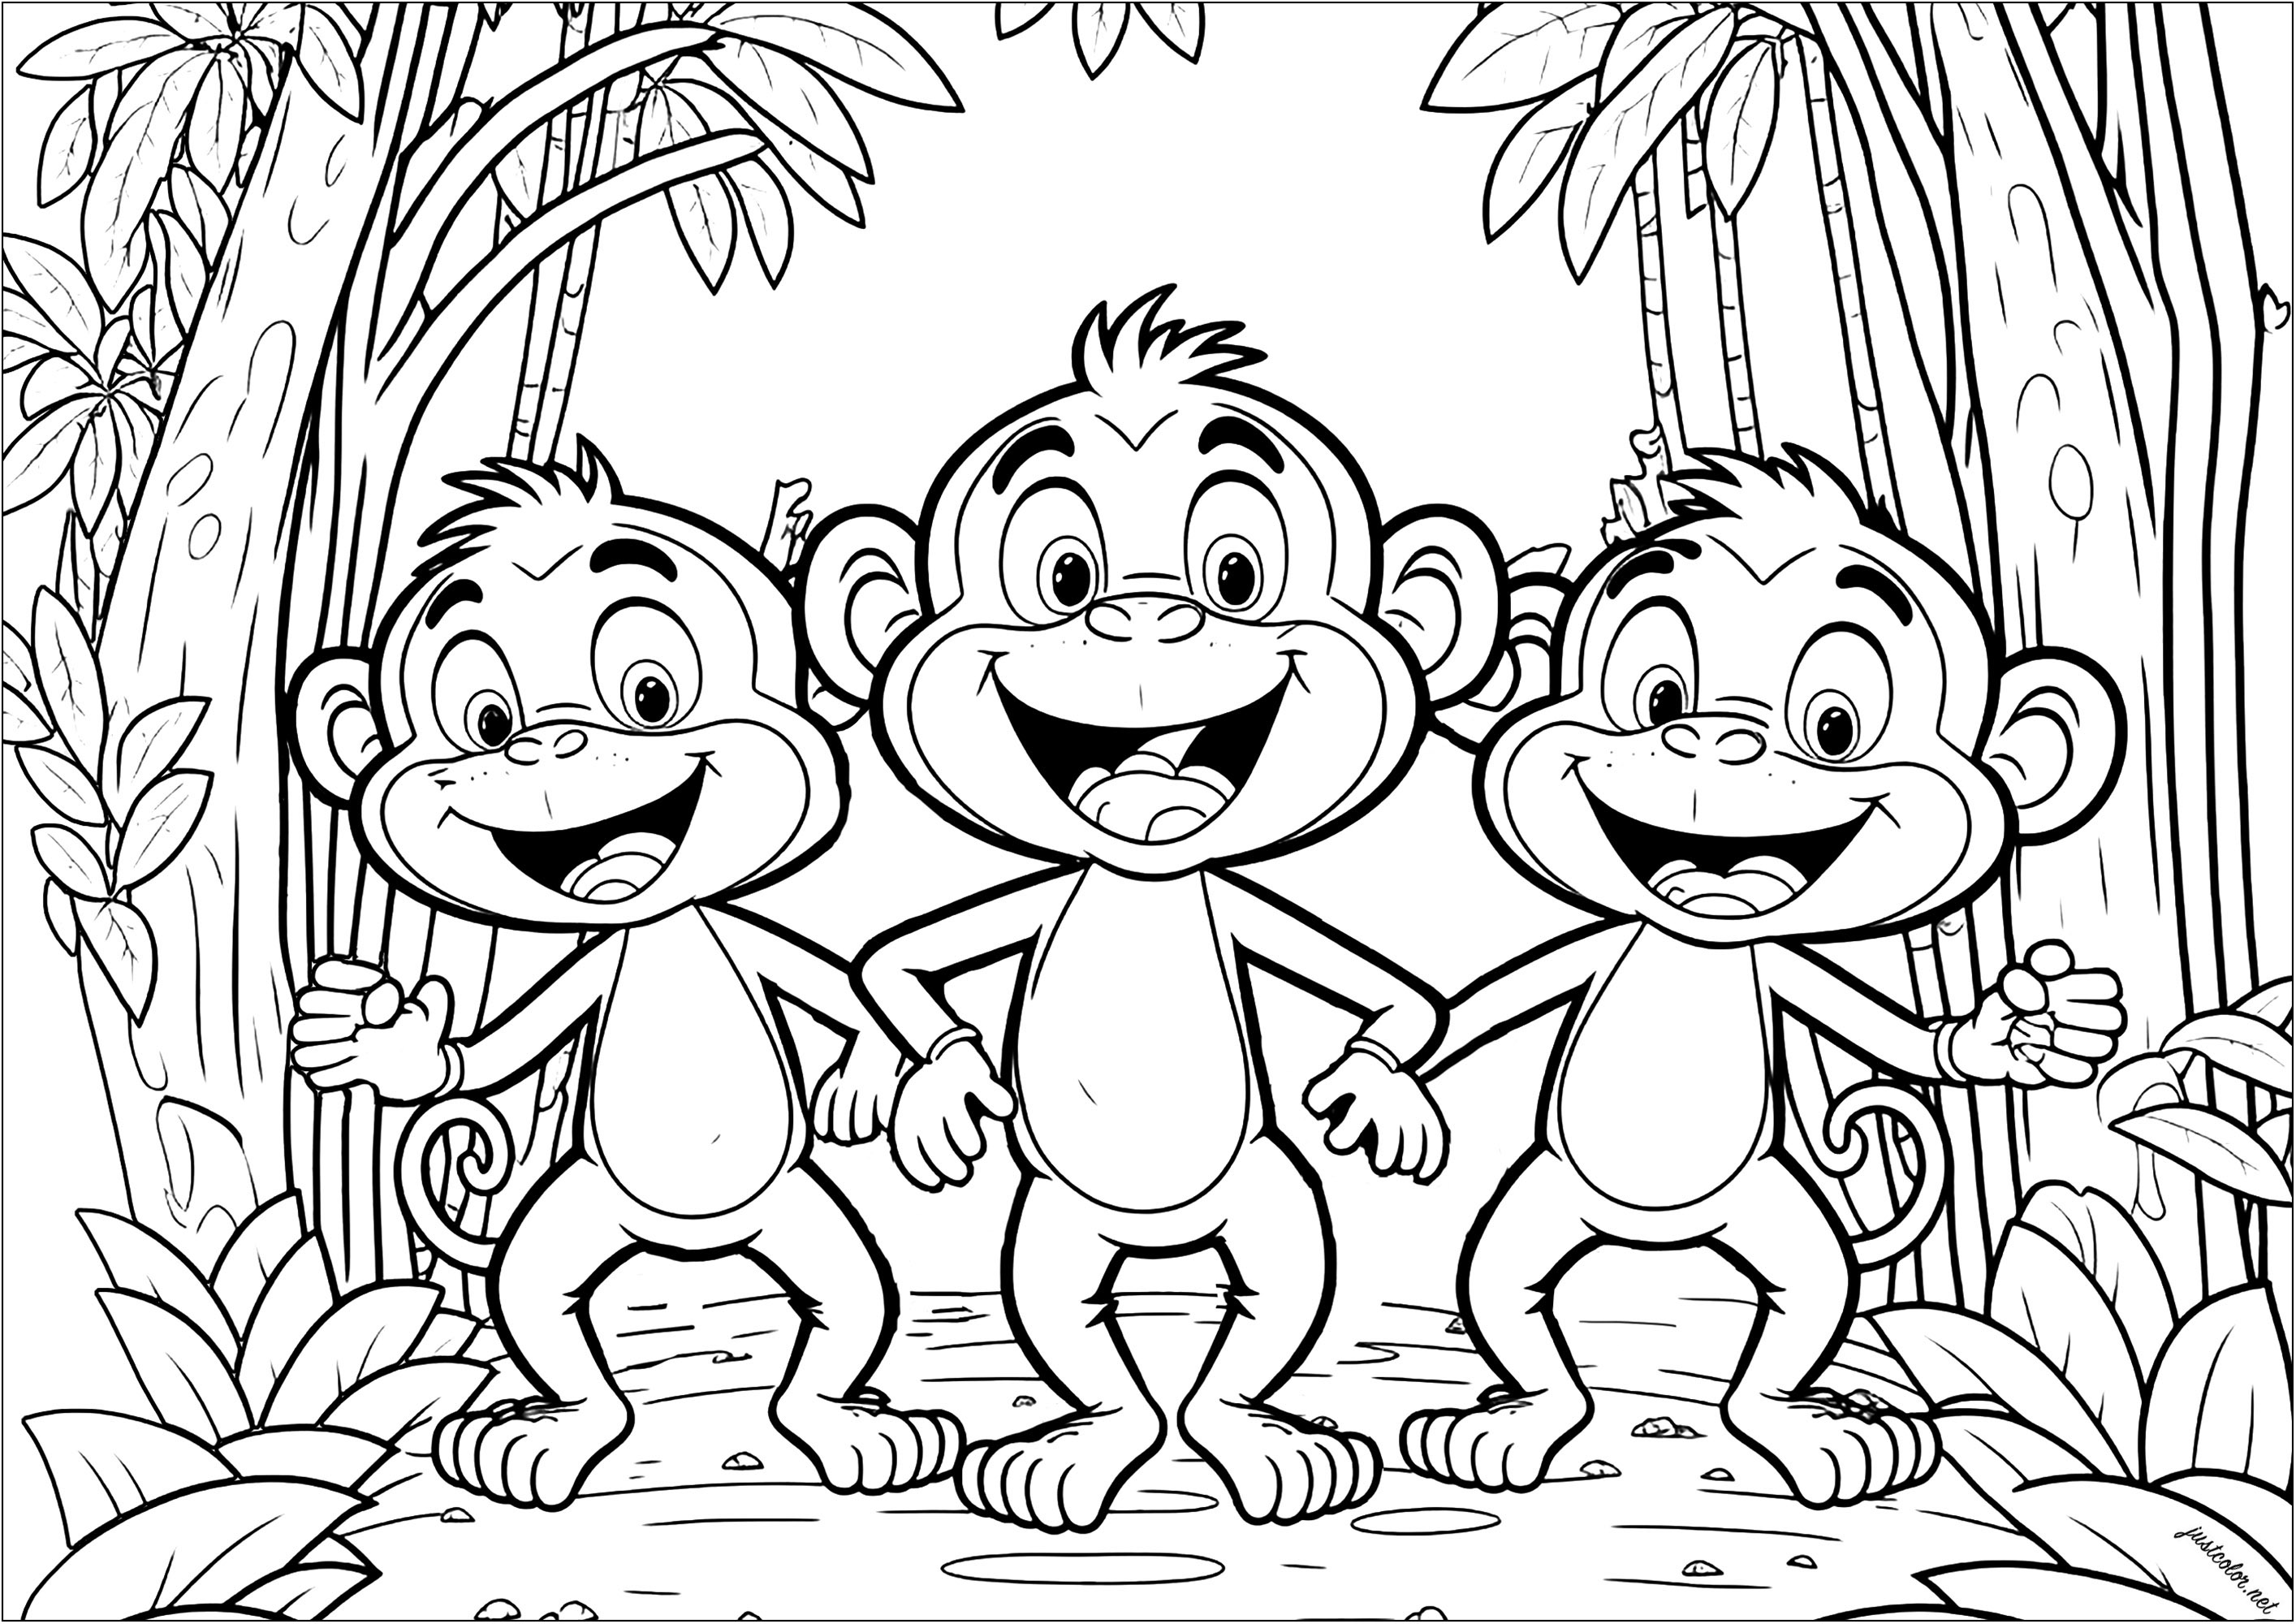 Three funny monkeys to color. These primates look very childish, but the coloring is made quite complex thanks to the vegetation in the background